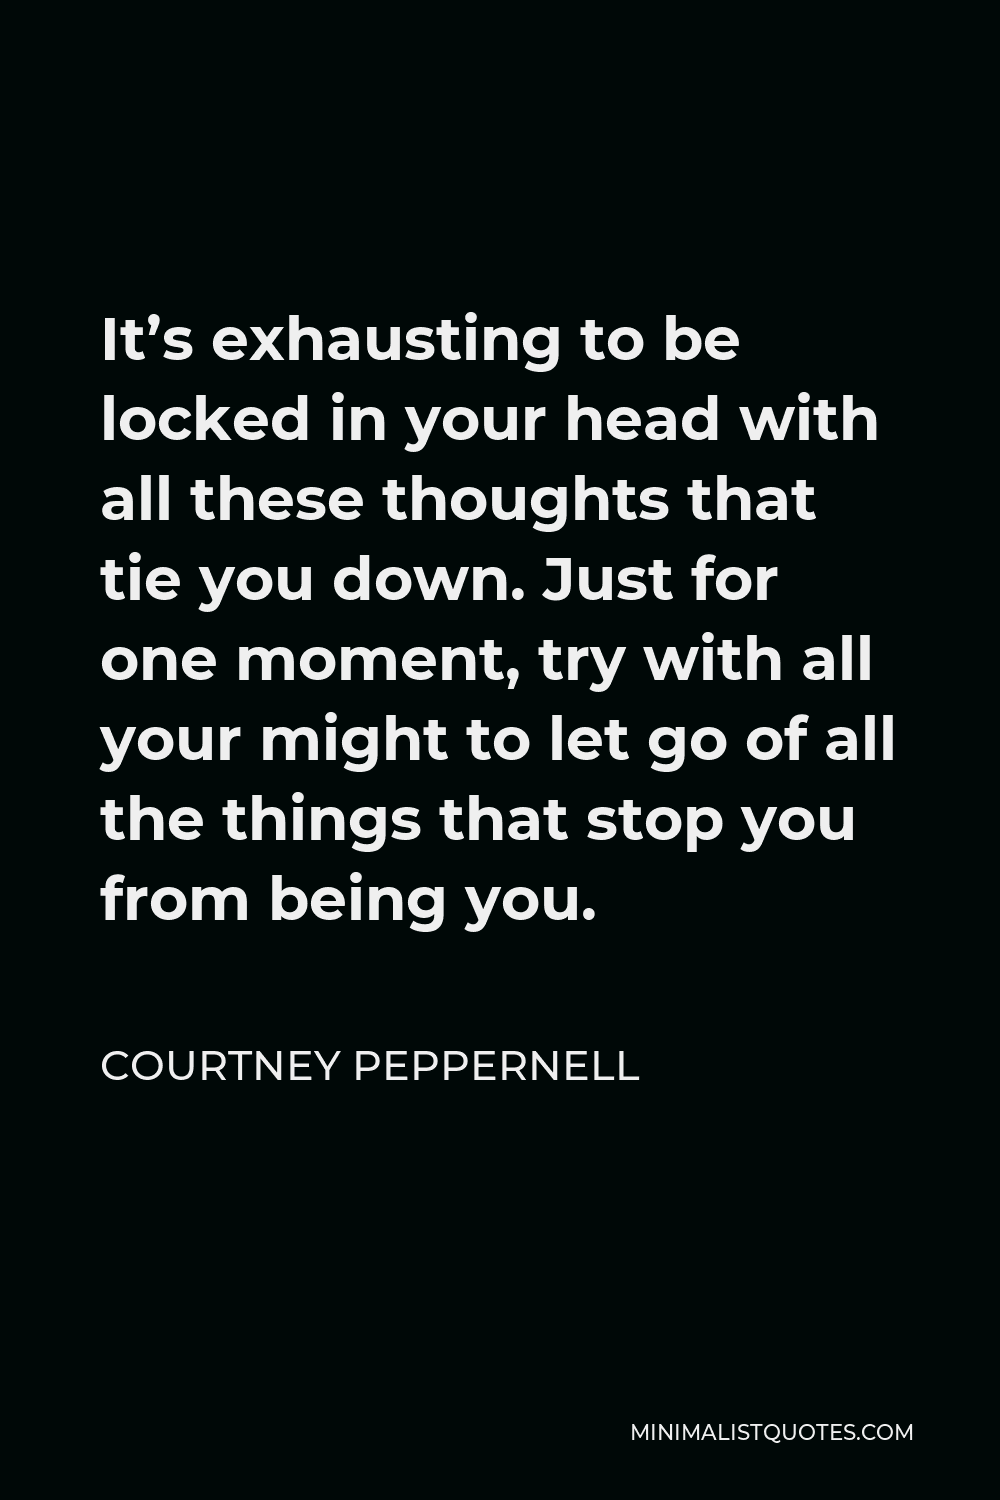 Courtney Peppernell Quote - It’s exhausting to be locked in your head with all these thoughts that tie you down. Just for one moment, try with all your might to let go of all the things that stop you from being you.